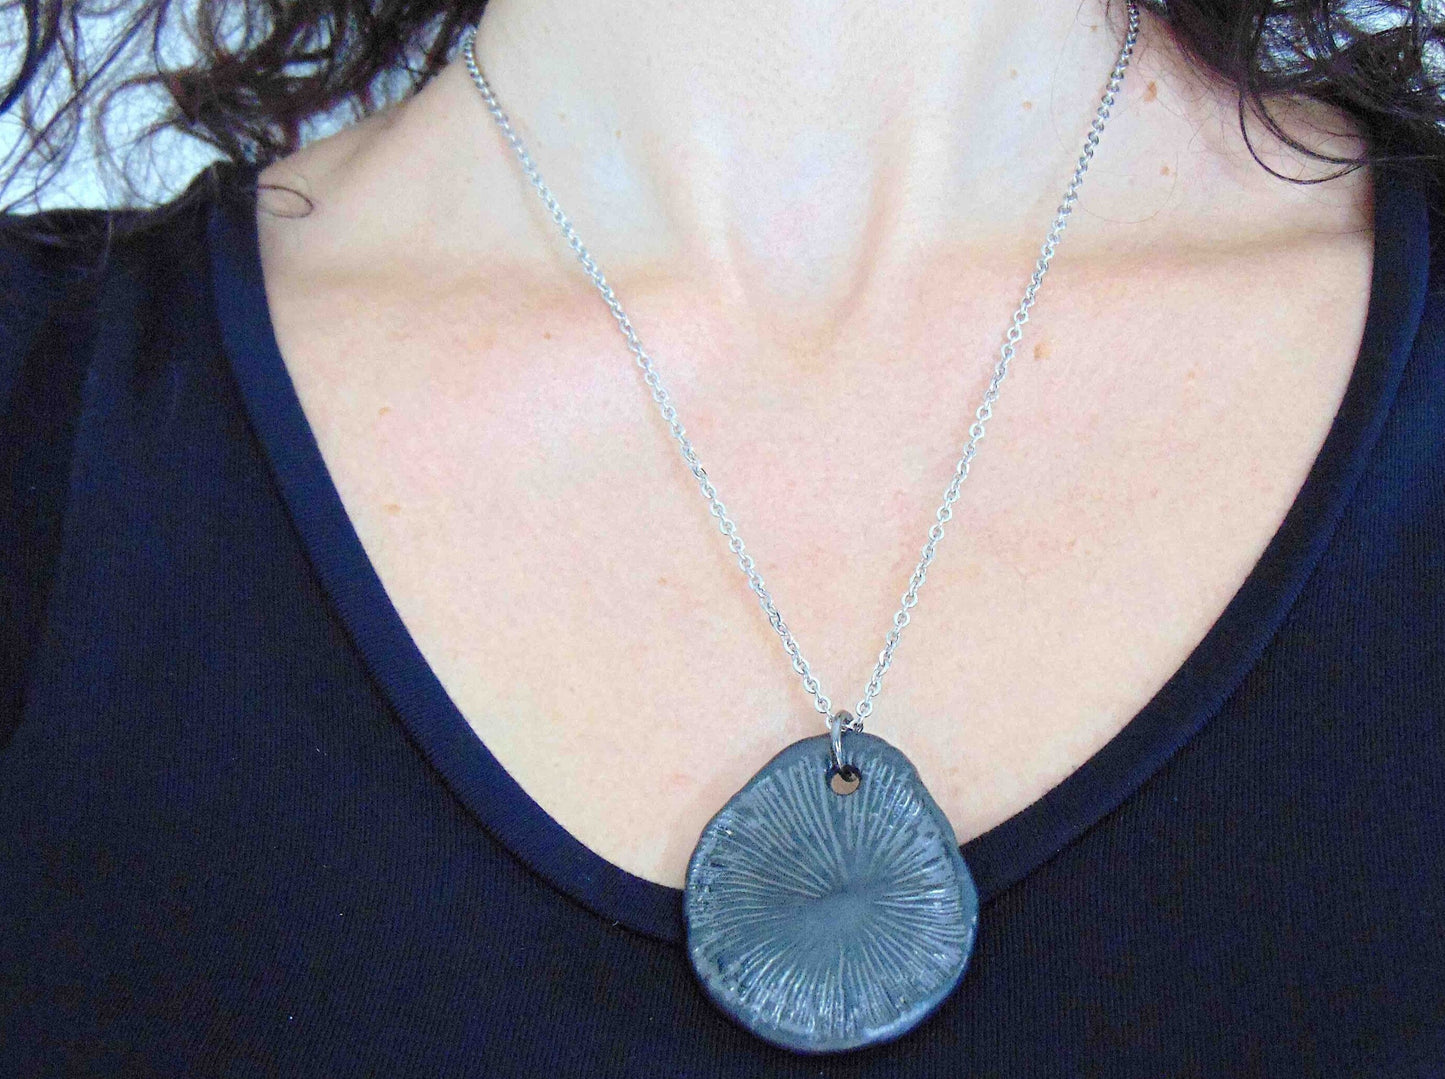 20-inch necklace with black nickel ceramic coral pendant handmade in Montreal, stainless steel chain